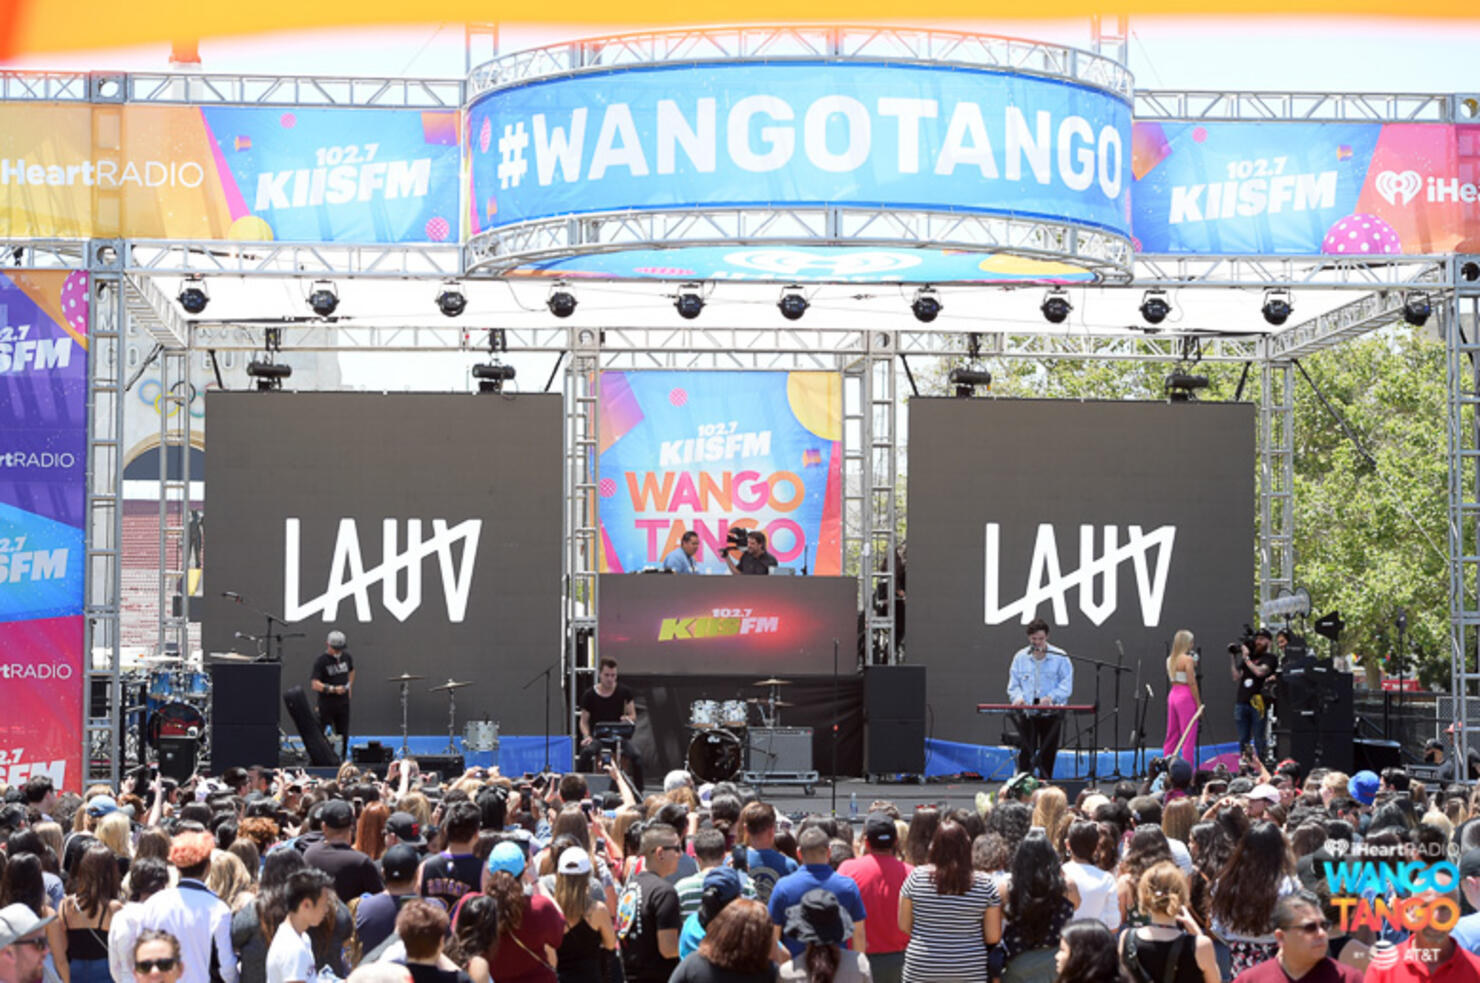  Lauv performs live during the KIIS FM Wango Tango Village at the 2018 iHeartRadio Wango Tango by AT&T